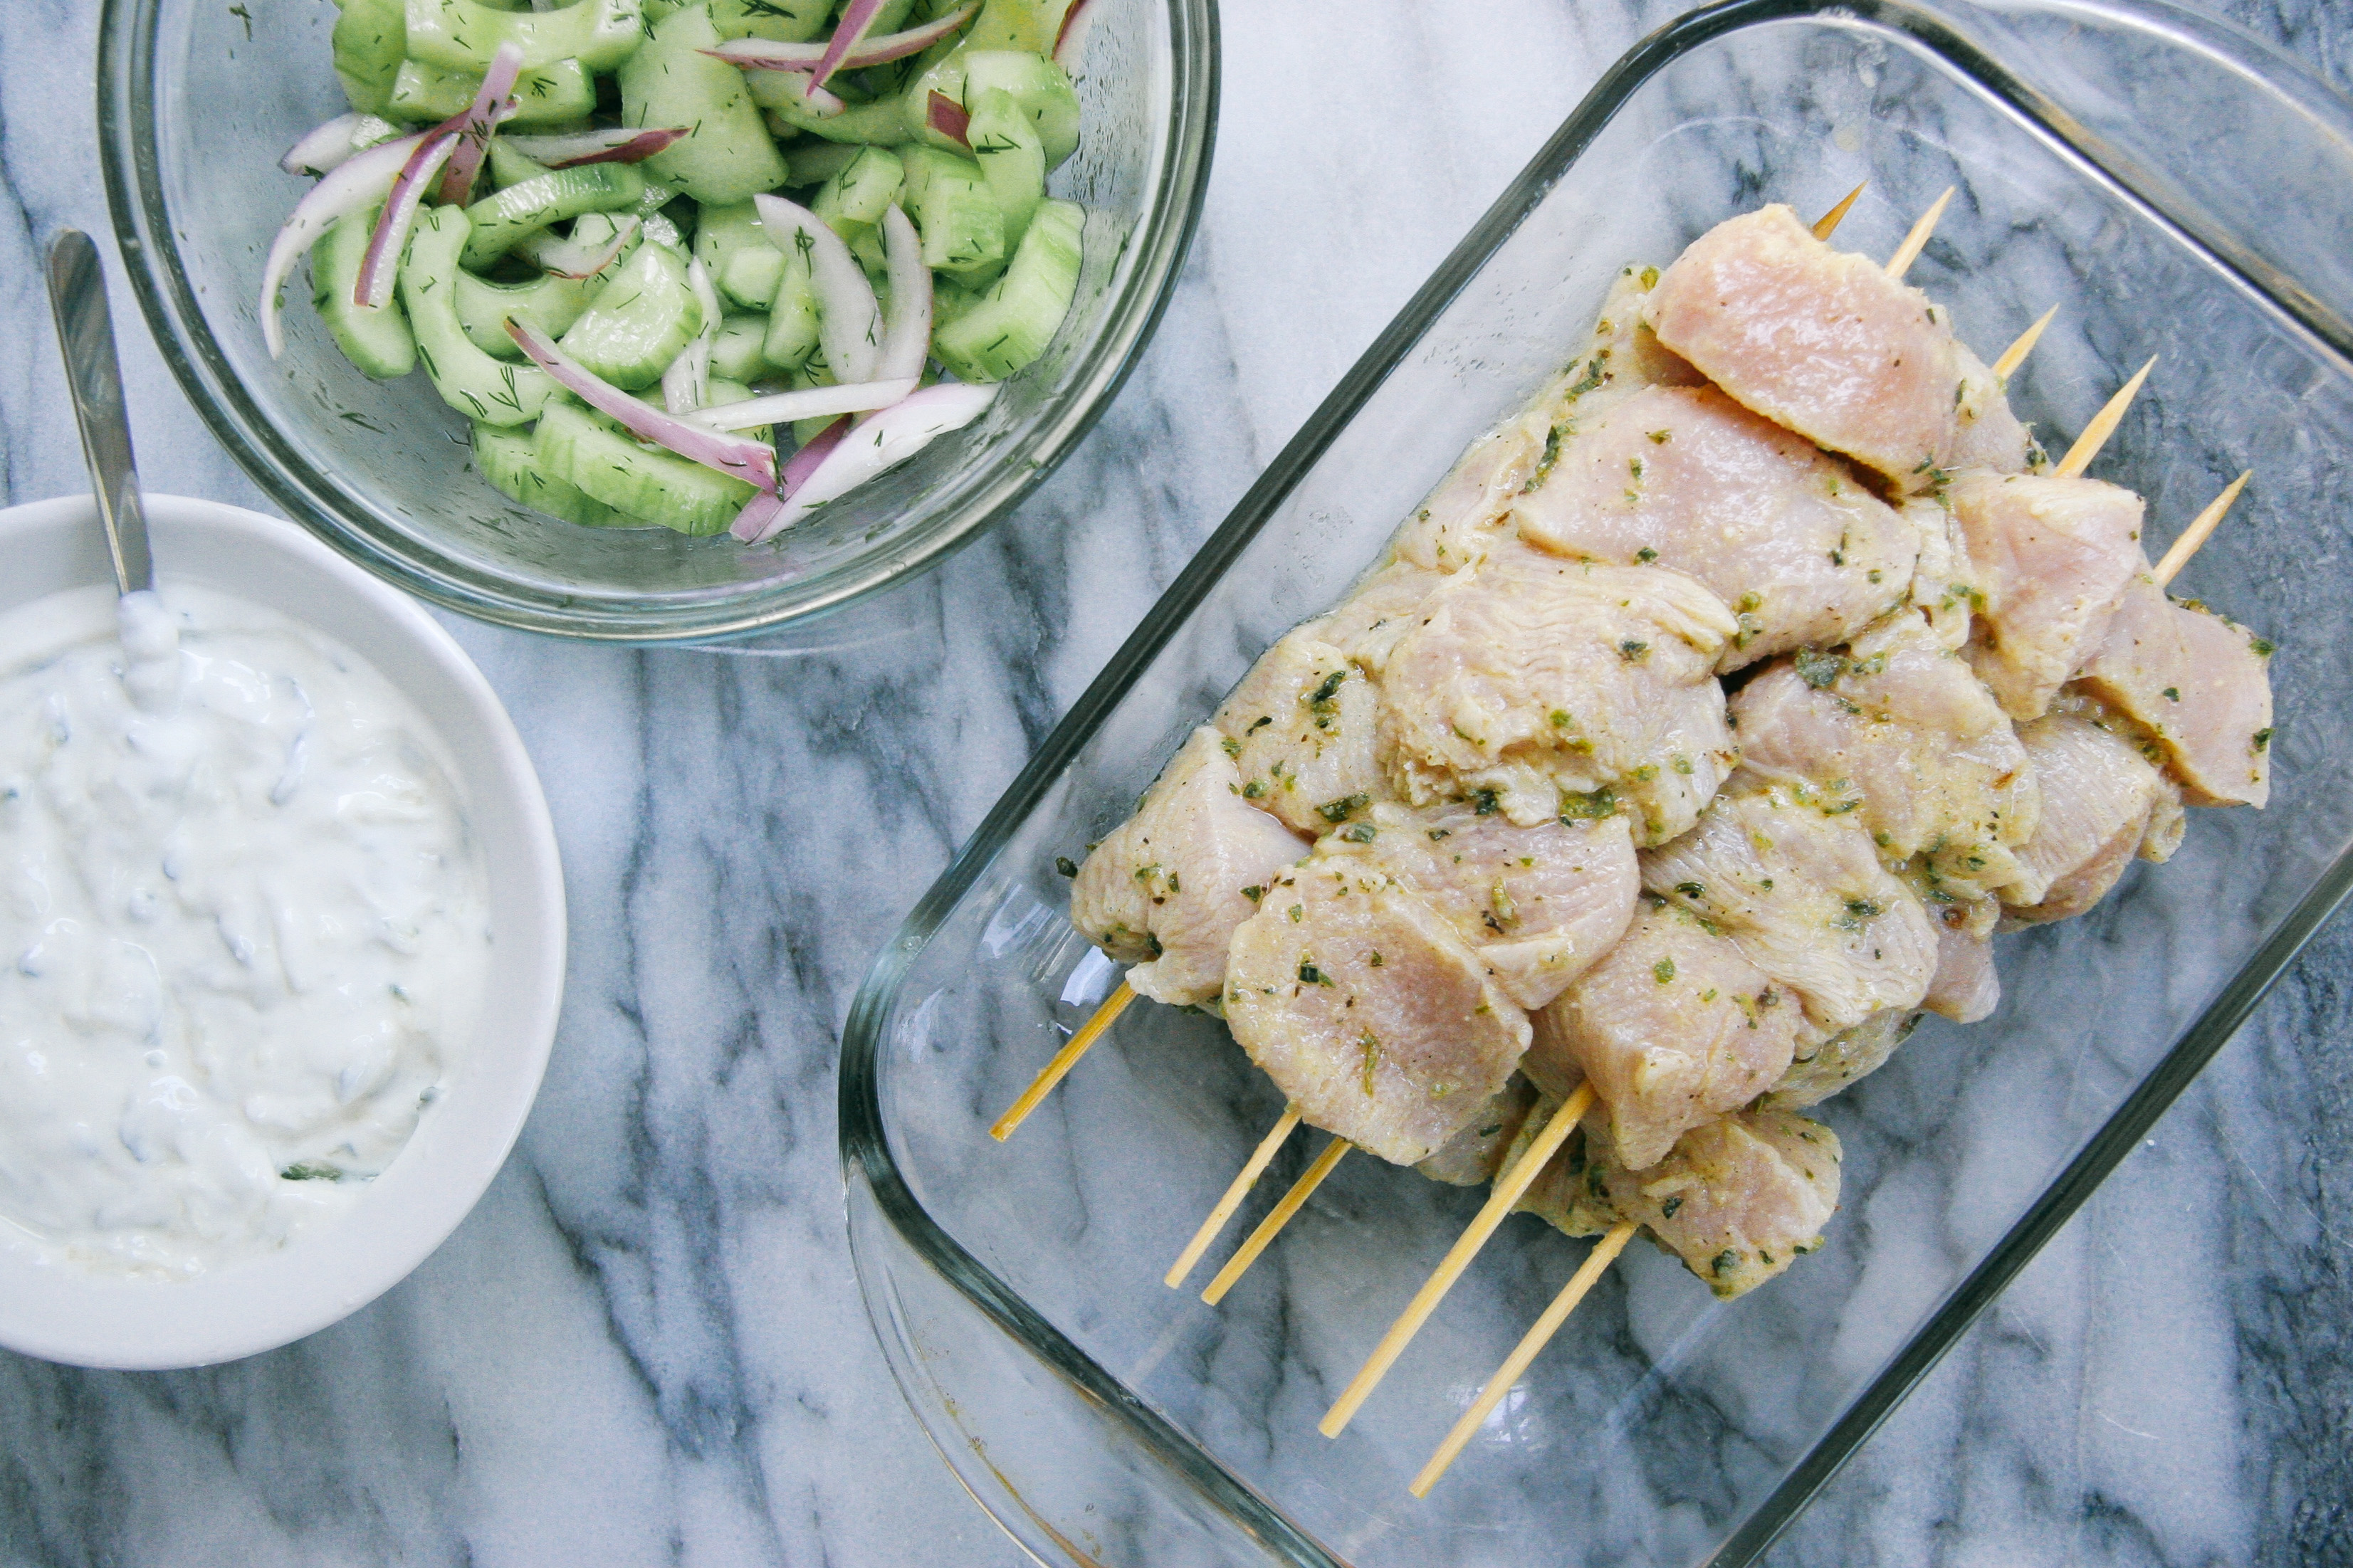 Grilled Chicken Kebab Bowls with Cucumber salad and Tzatziki | I Will Not Eat Oysters